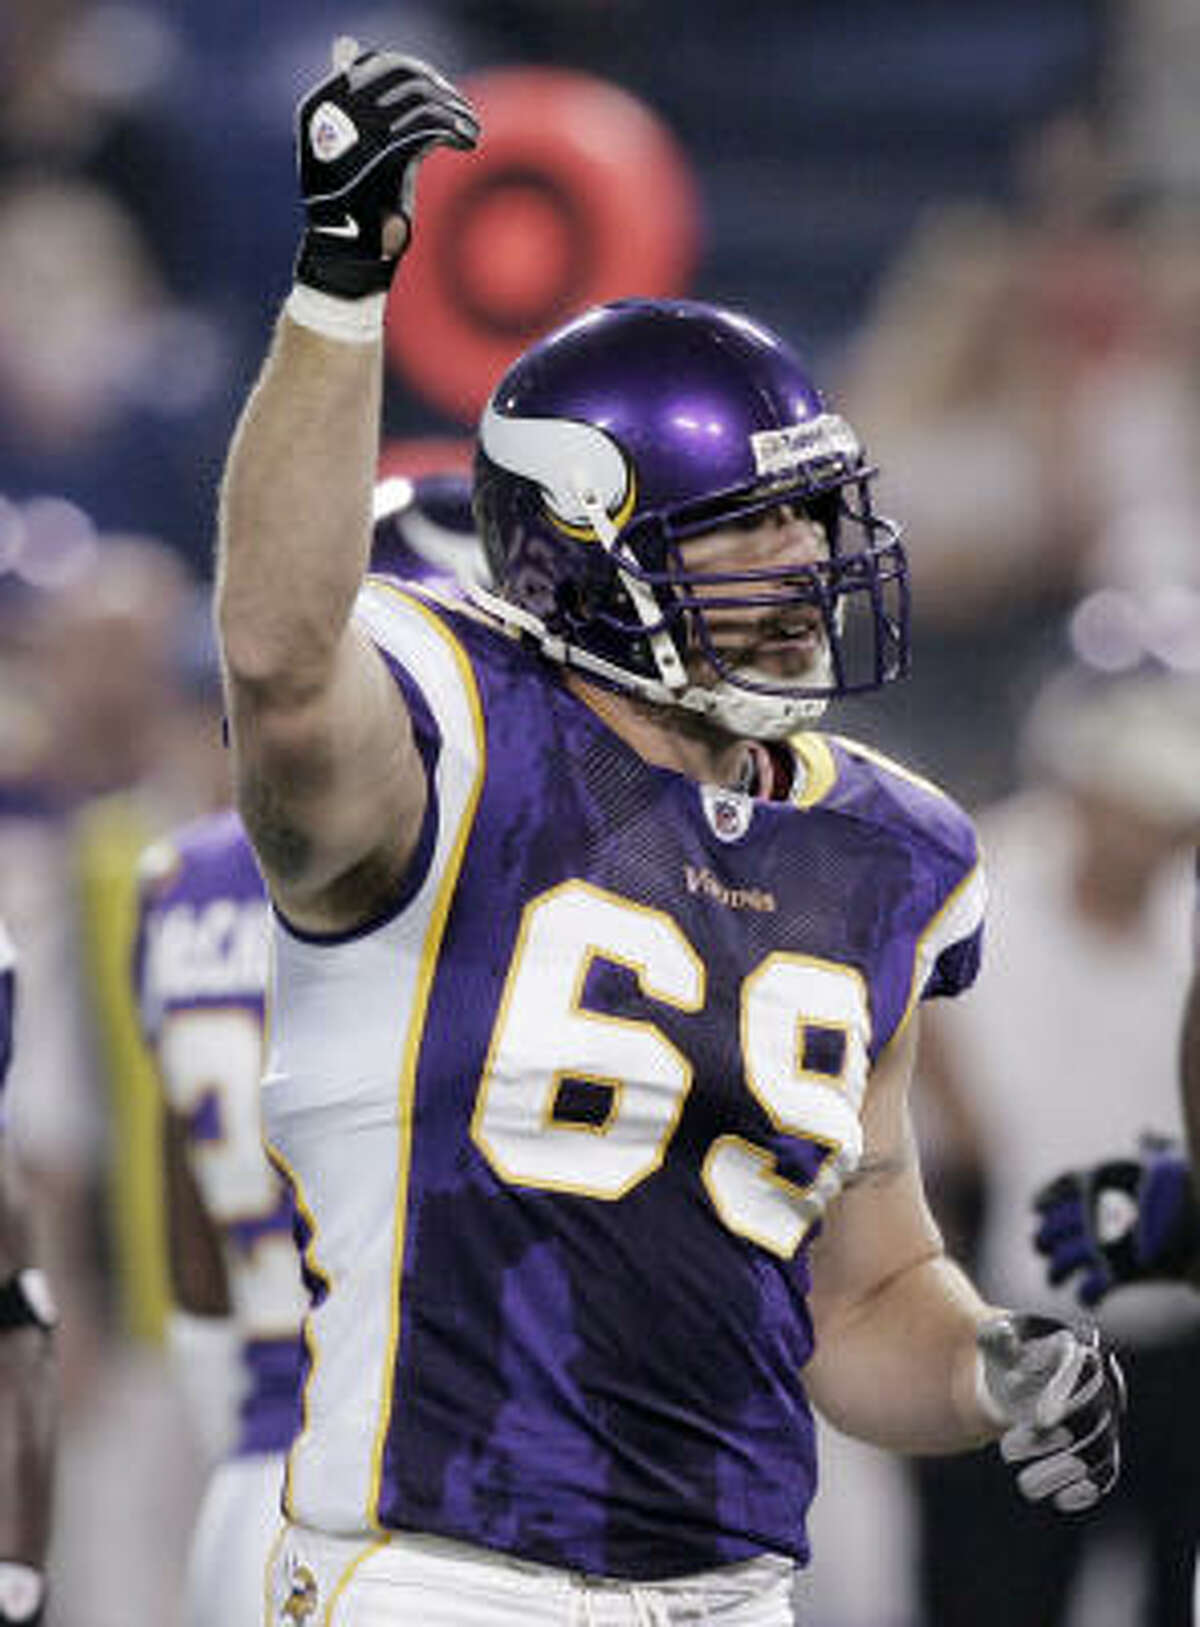 Jared Allen attempted to apologize to Matt Schaub after the game, saying he was slipping when he made contact.